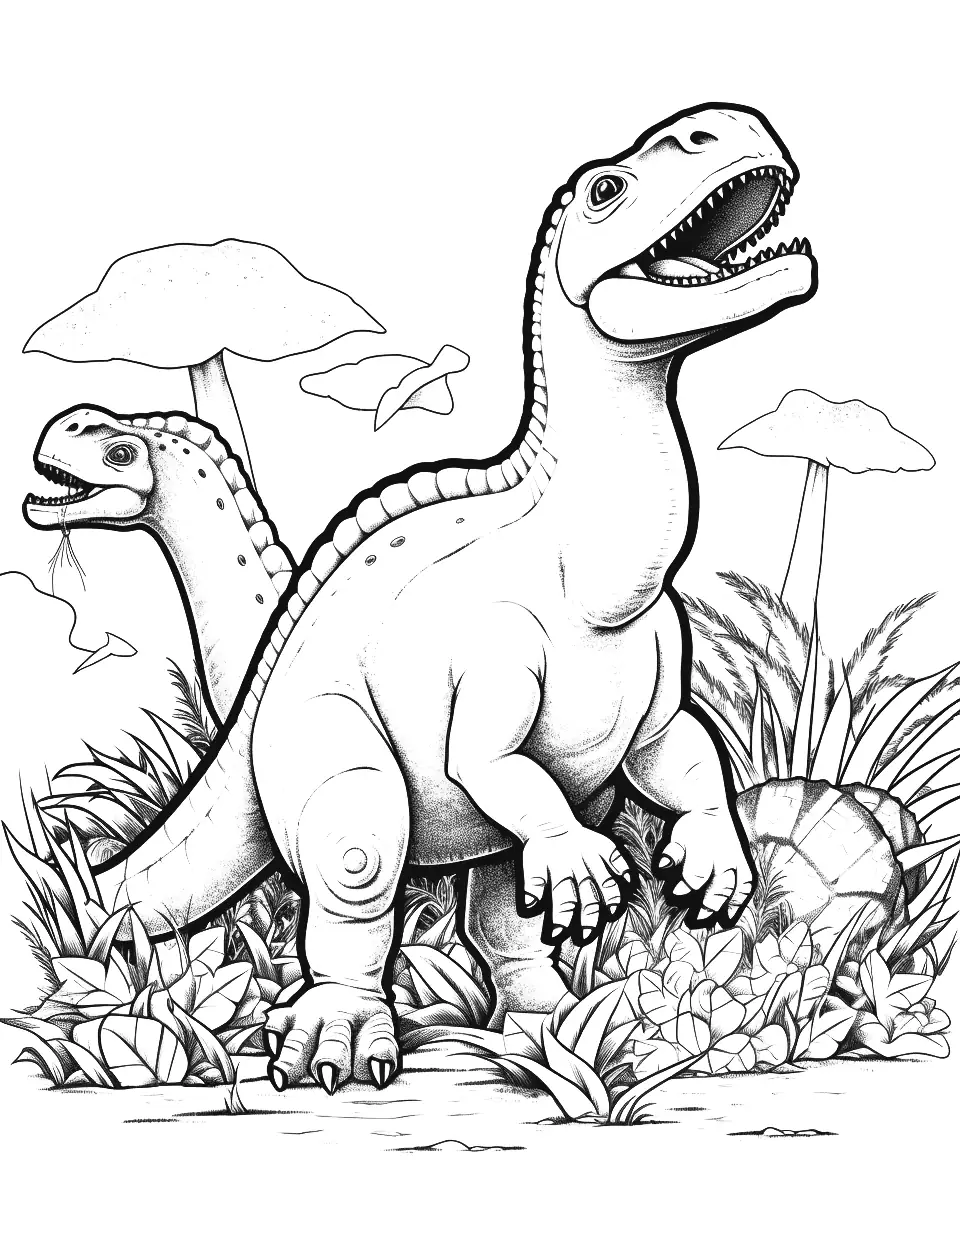 Jurassic World Dino Run Dinosaur Coloring Page - Dinosaurs escaping from their enclosures in Jurassic World.